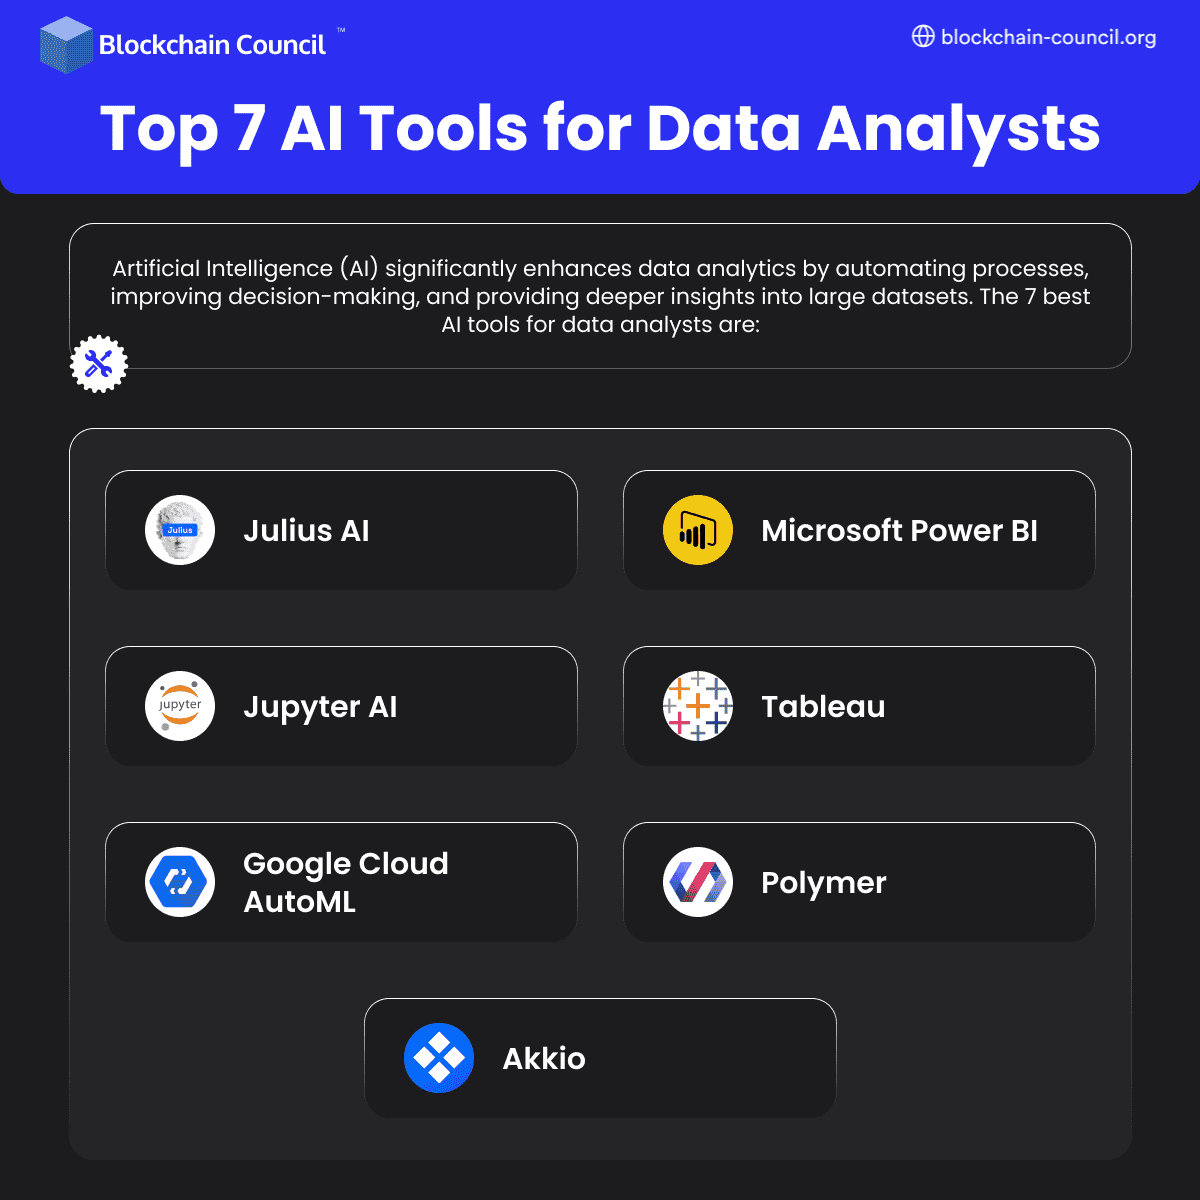 Top 7 AI Tools for Data Analysts